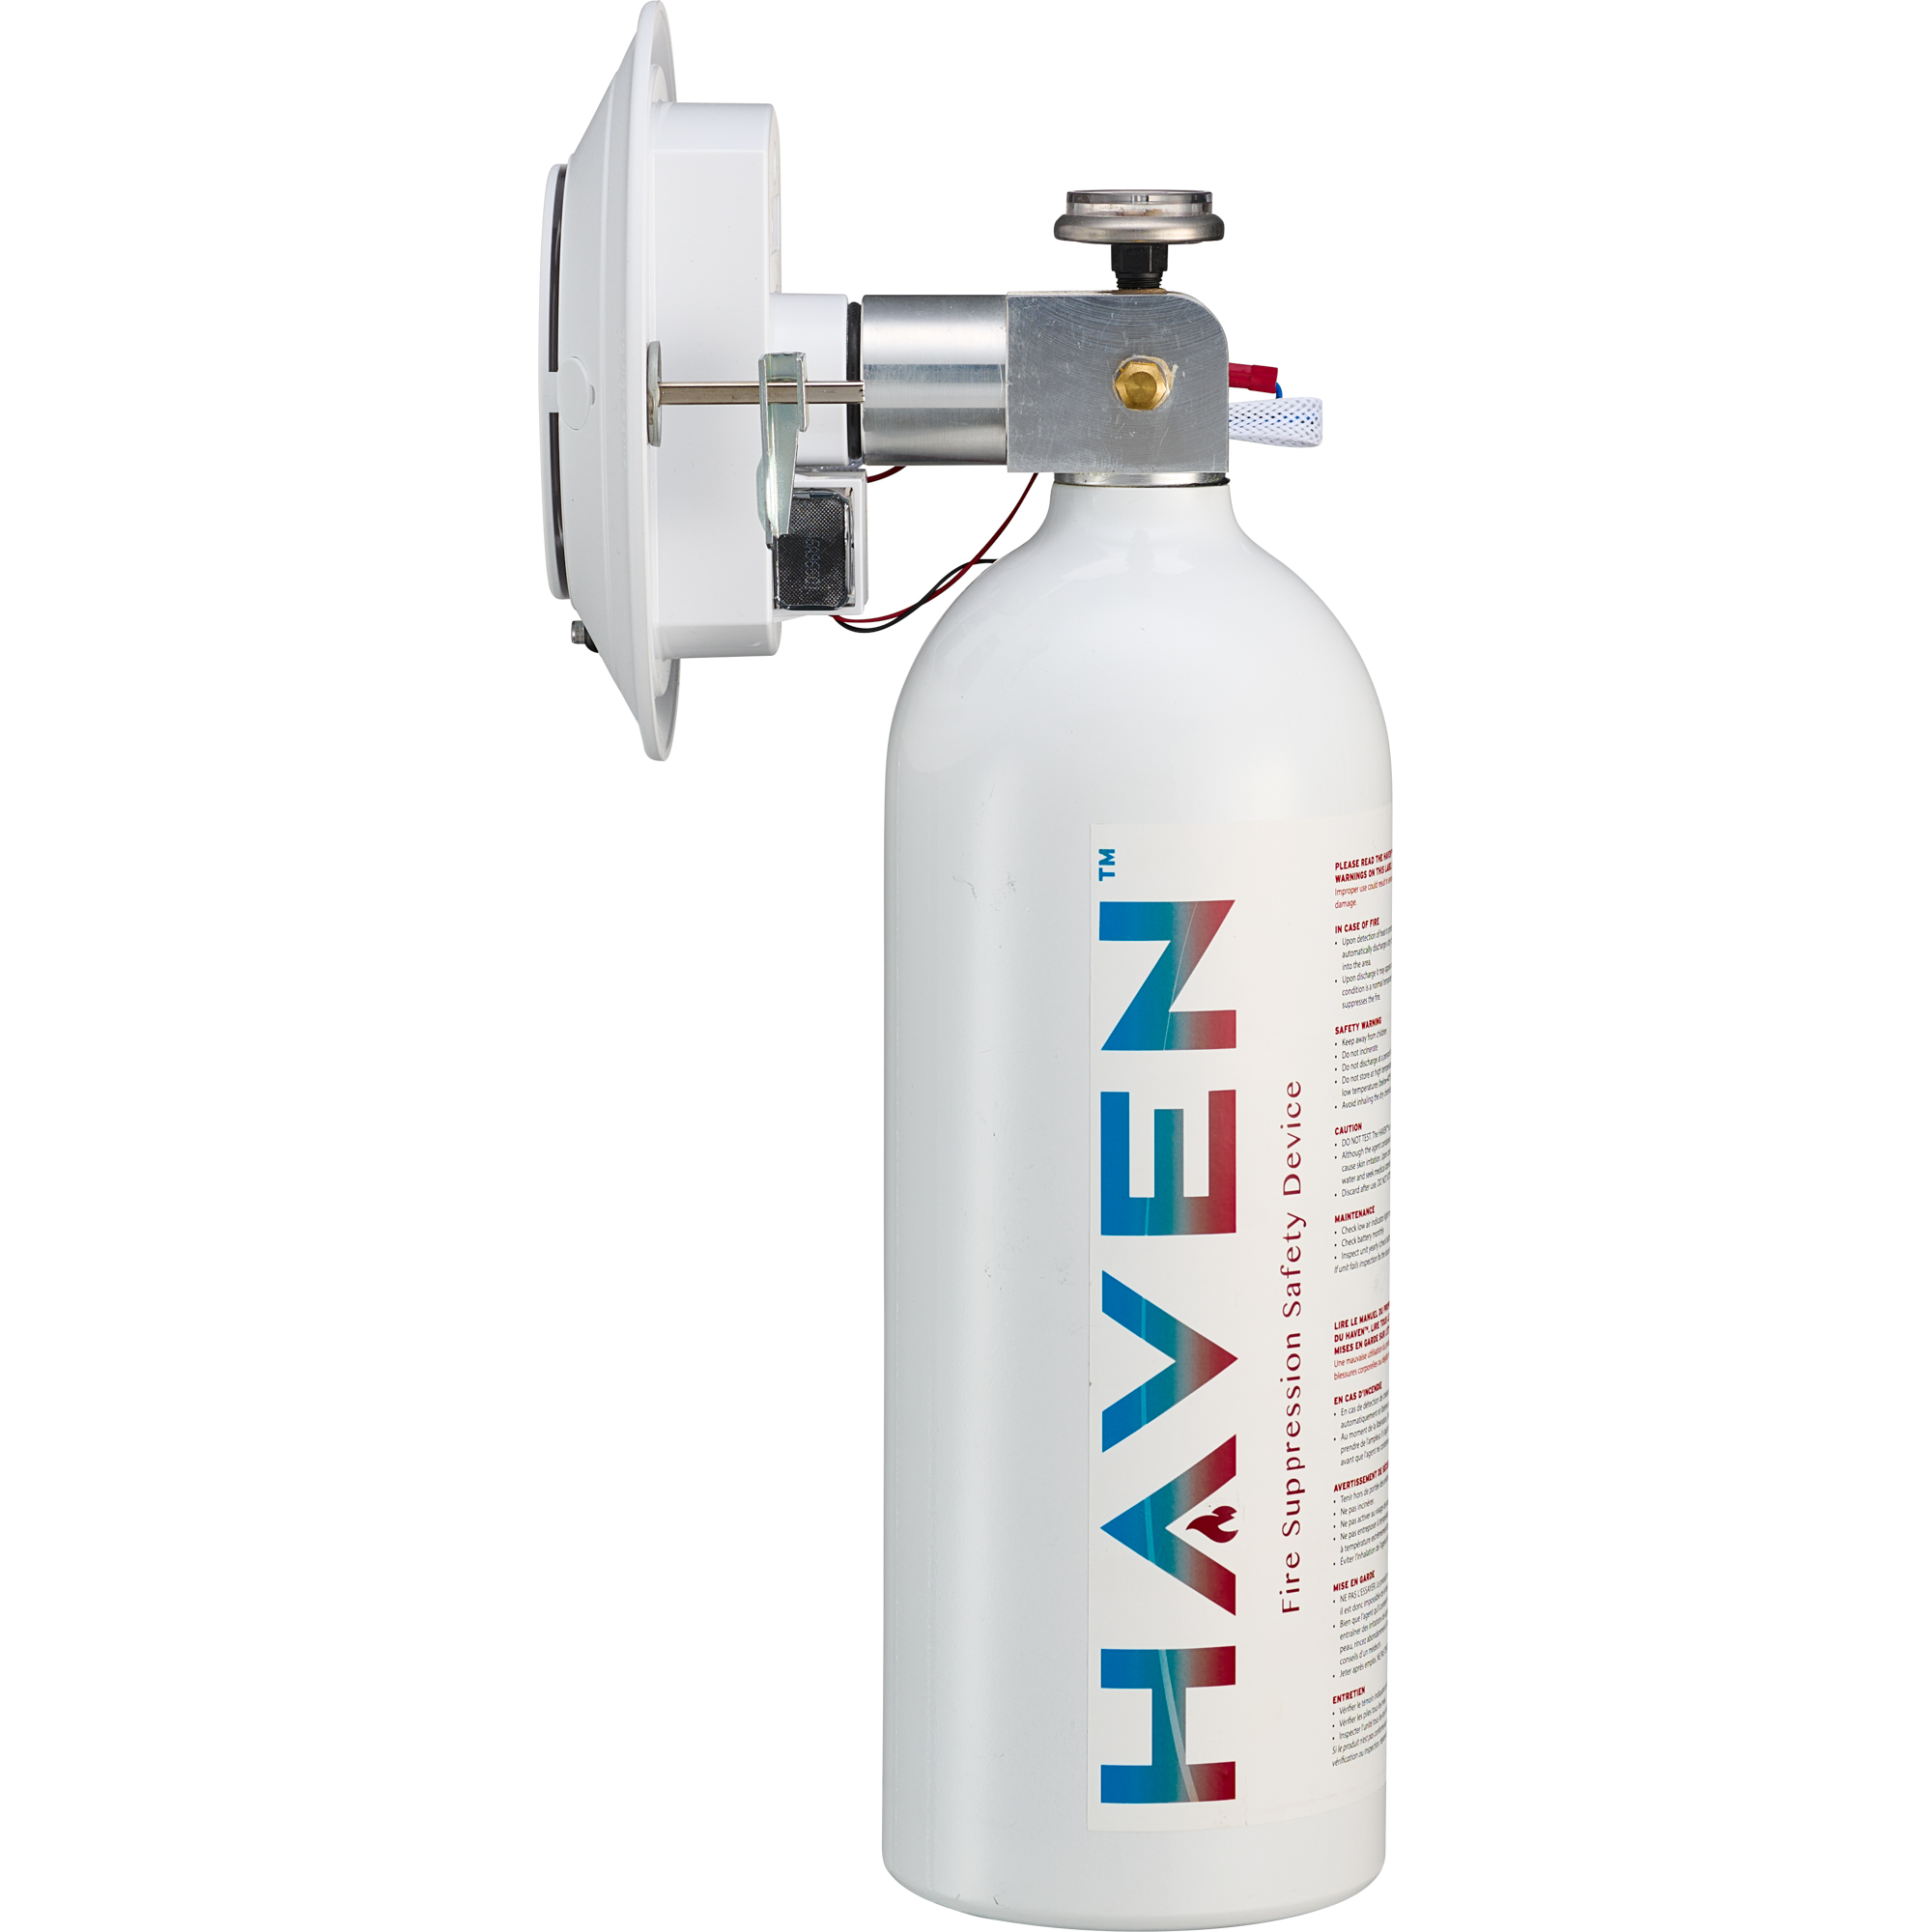 HAVEN Fire Suppression Safety Device 155F - 68C Rated